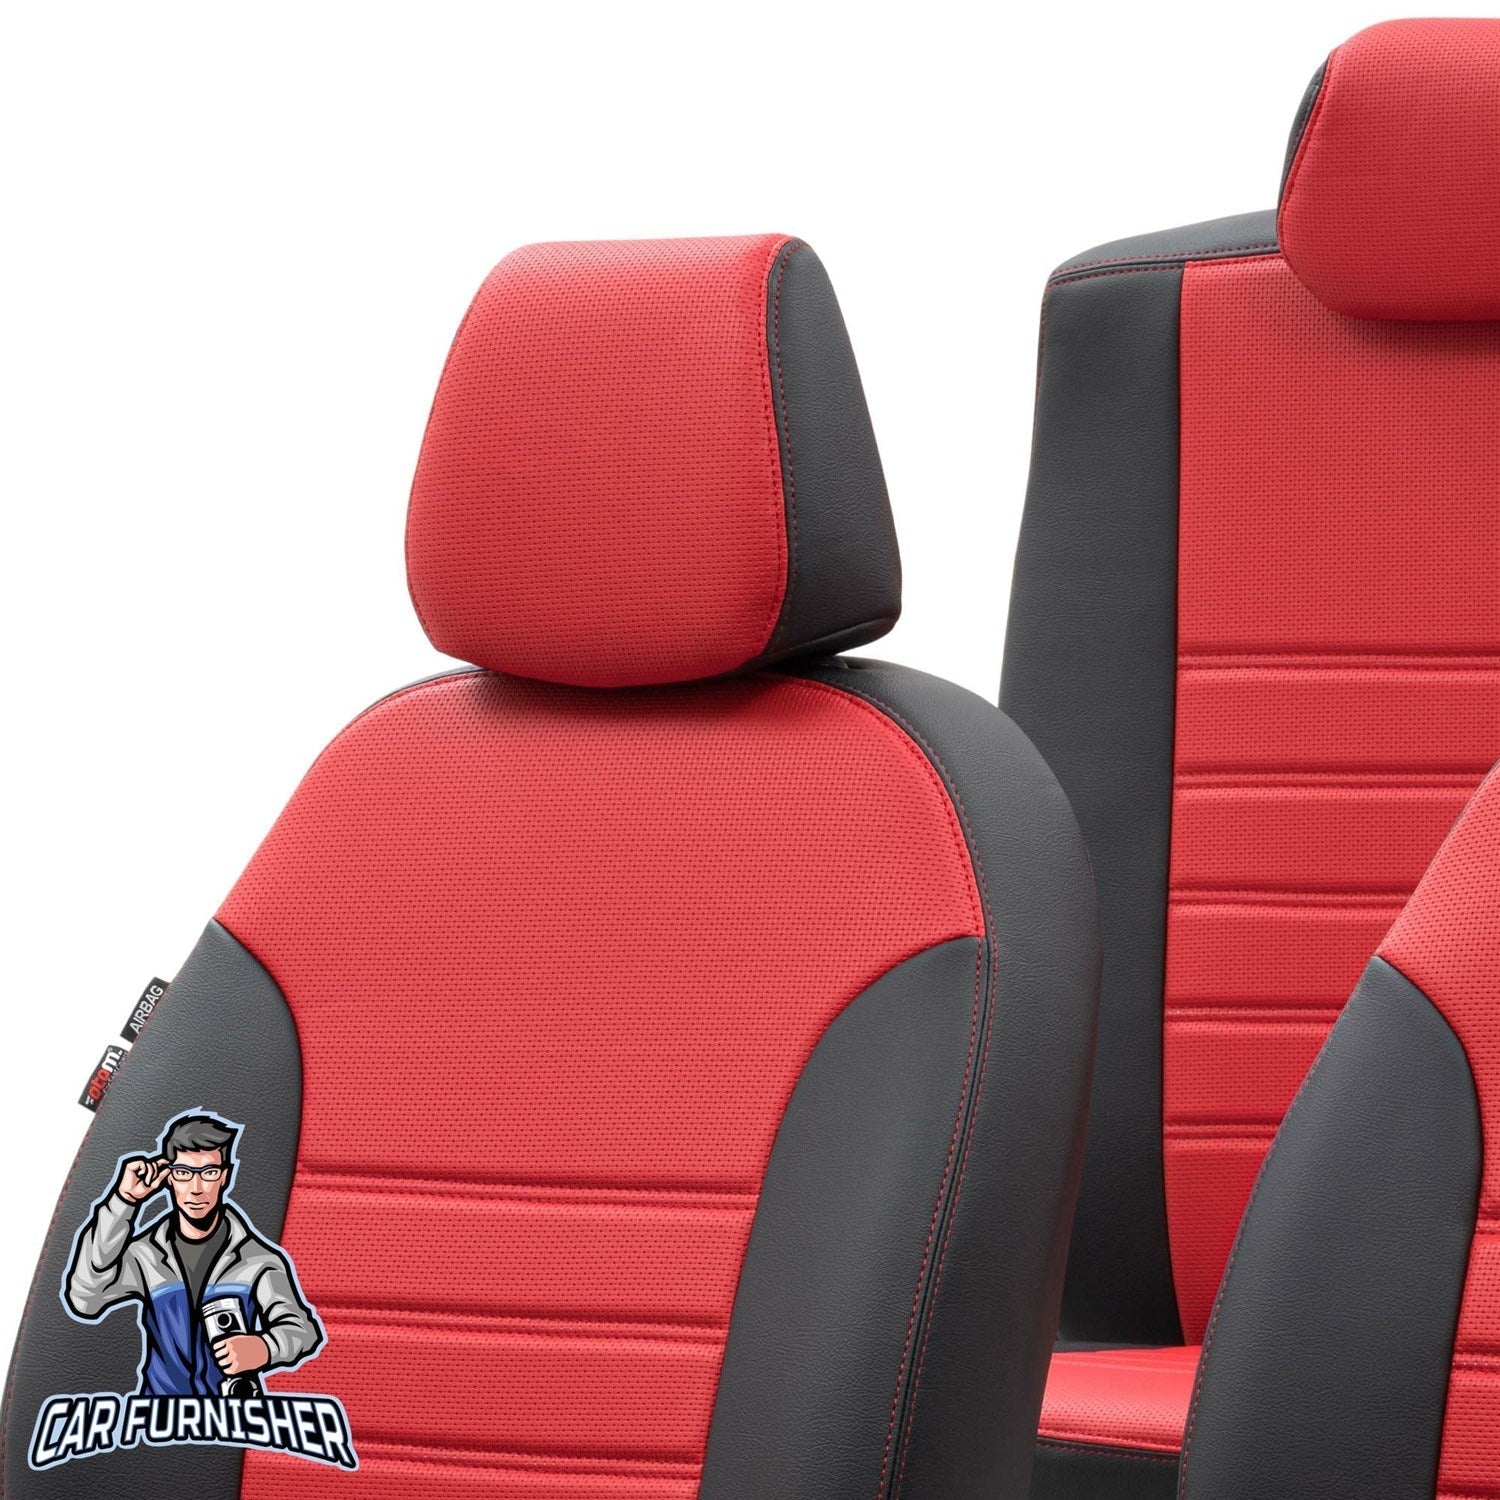 Fiat Stilo Seat Covers New York Leather Design Red Leather